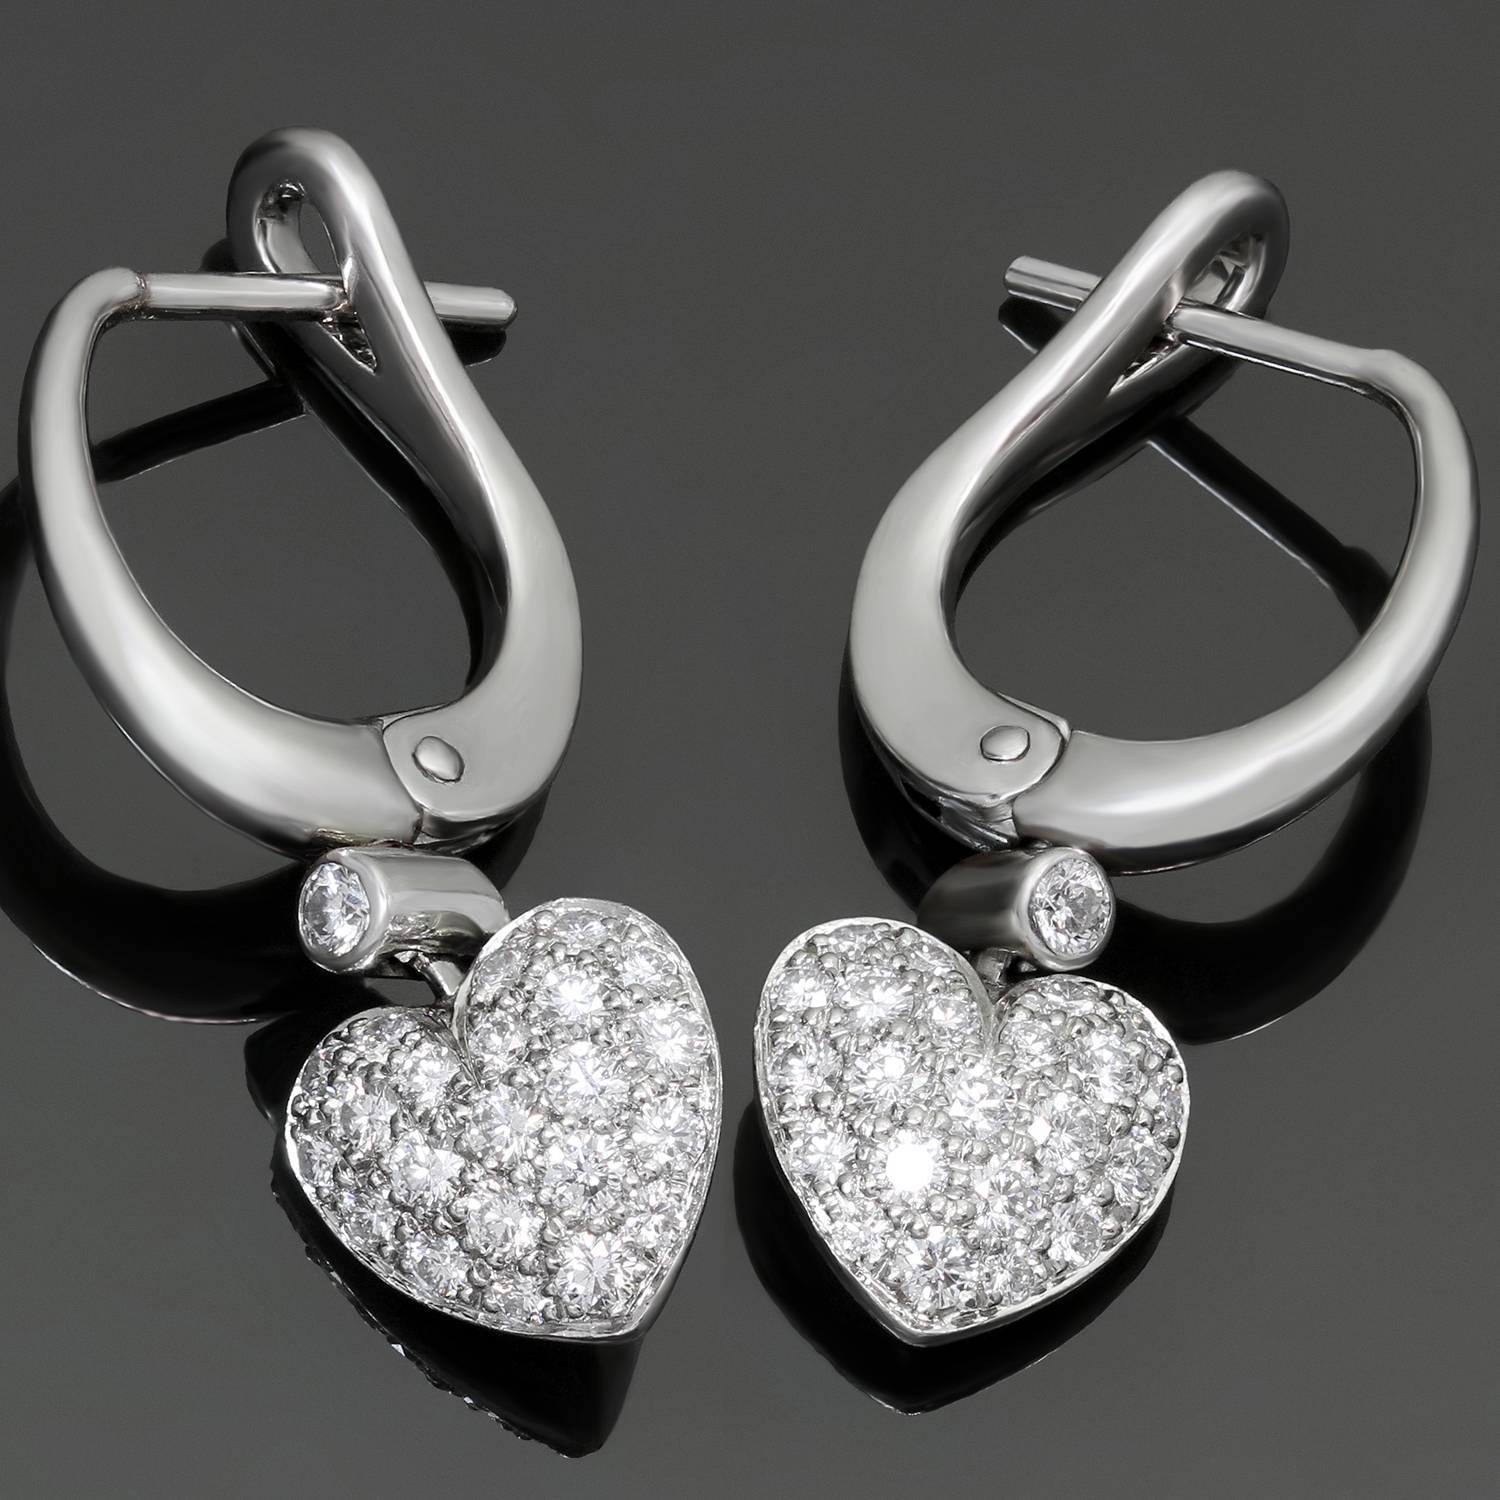 These gorgeous Tiffany earrings are crafted in platinum and feature sparkling heart-shaped drops set with brilliant-cut round diamonds weighing an estimated 0.94 carats. Made in France circa 2003. Measurements: 0.35